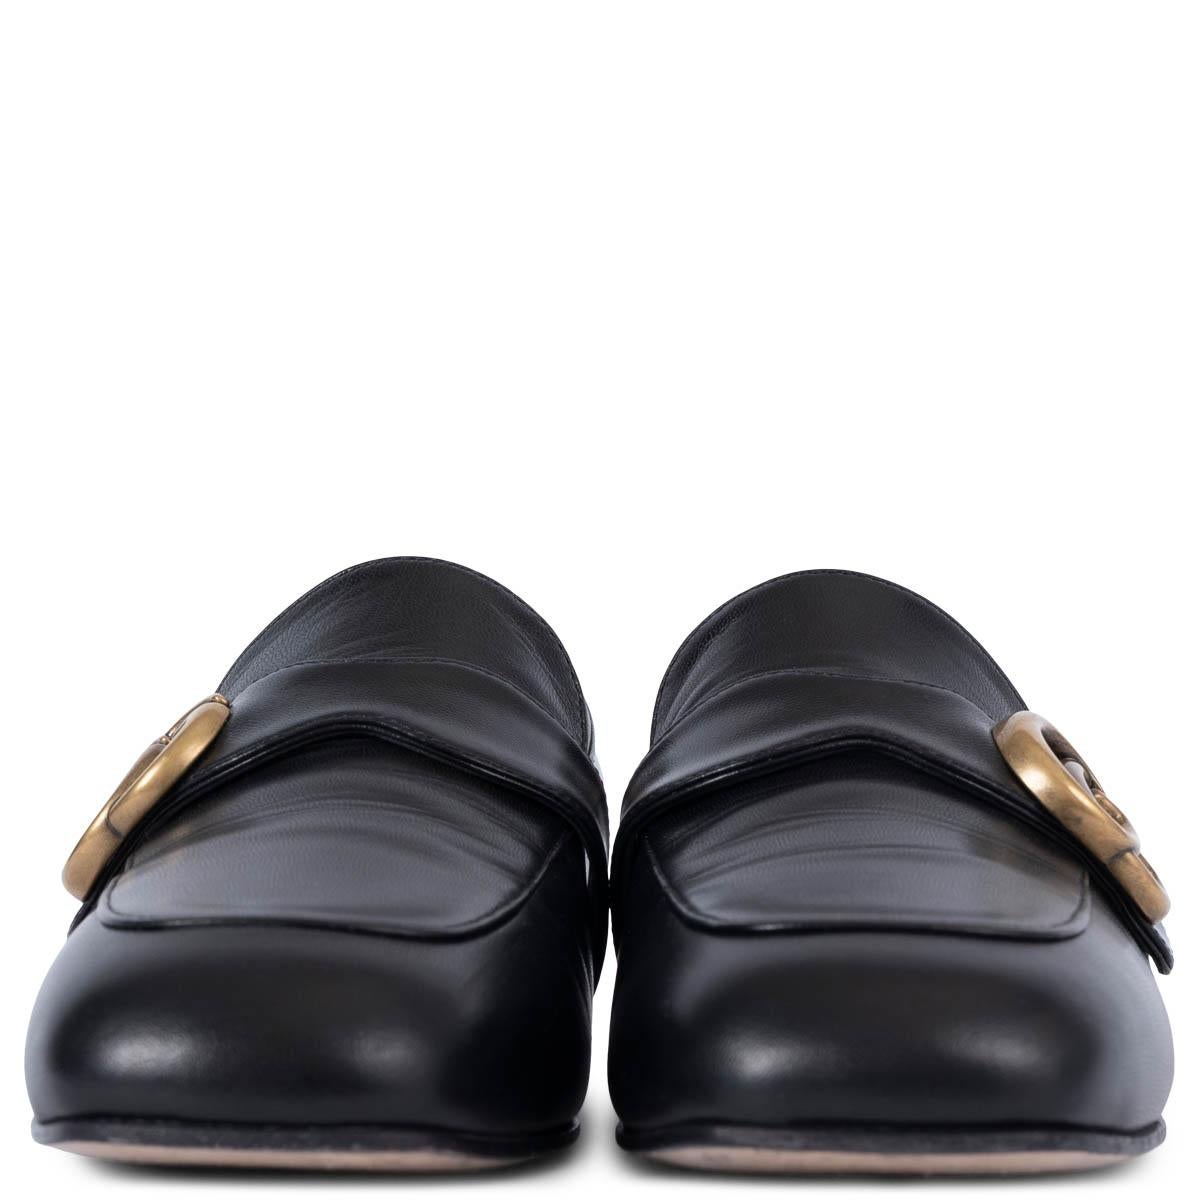 100% authentic Gucci GG Marmont loafers in black buffed kidskin leather. The design features a square moc toe and antique gold-tone logo hardware at vamp. Have been worn and are in excellent condition. 

Measurements
Imprinted Size	38
Shoe